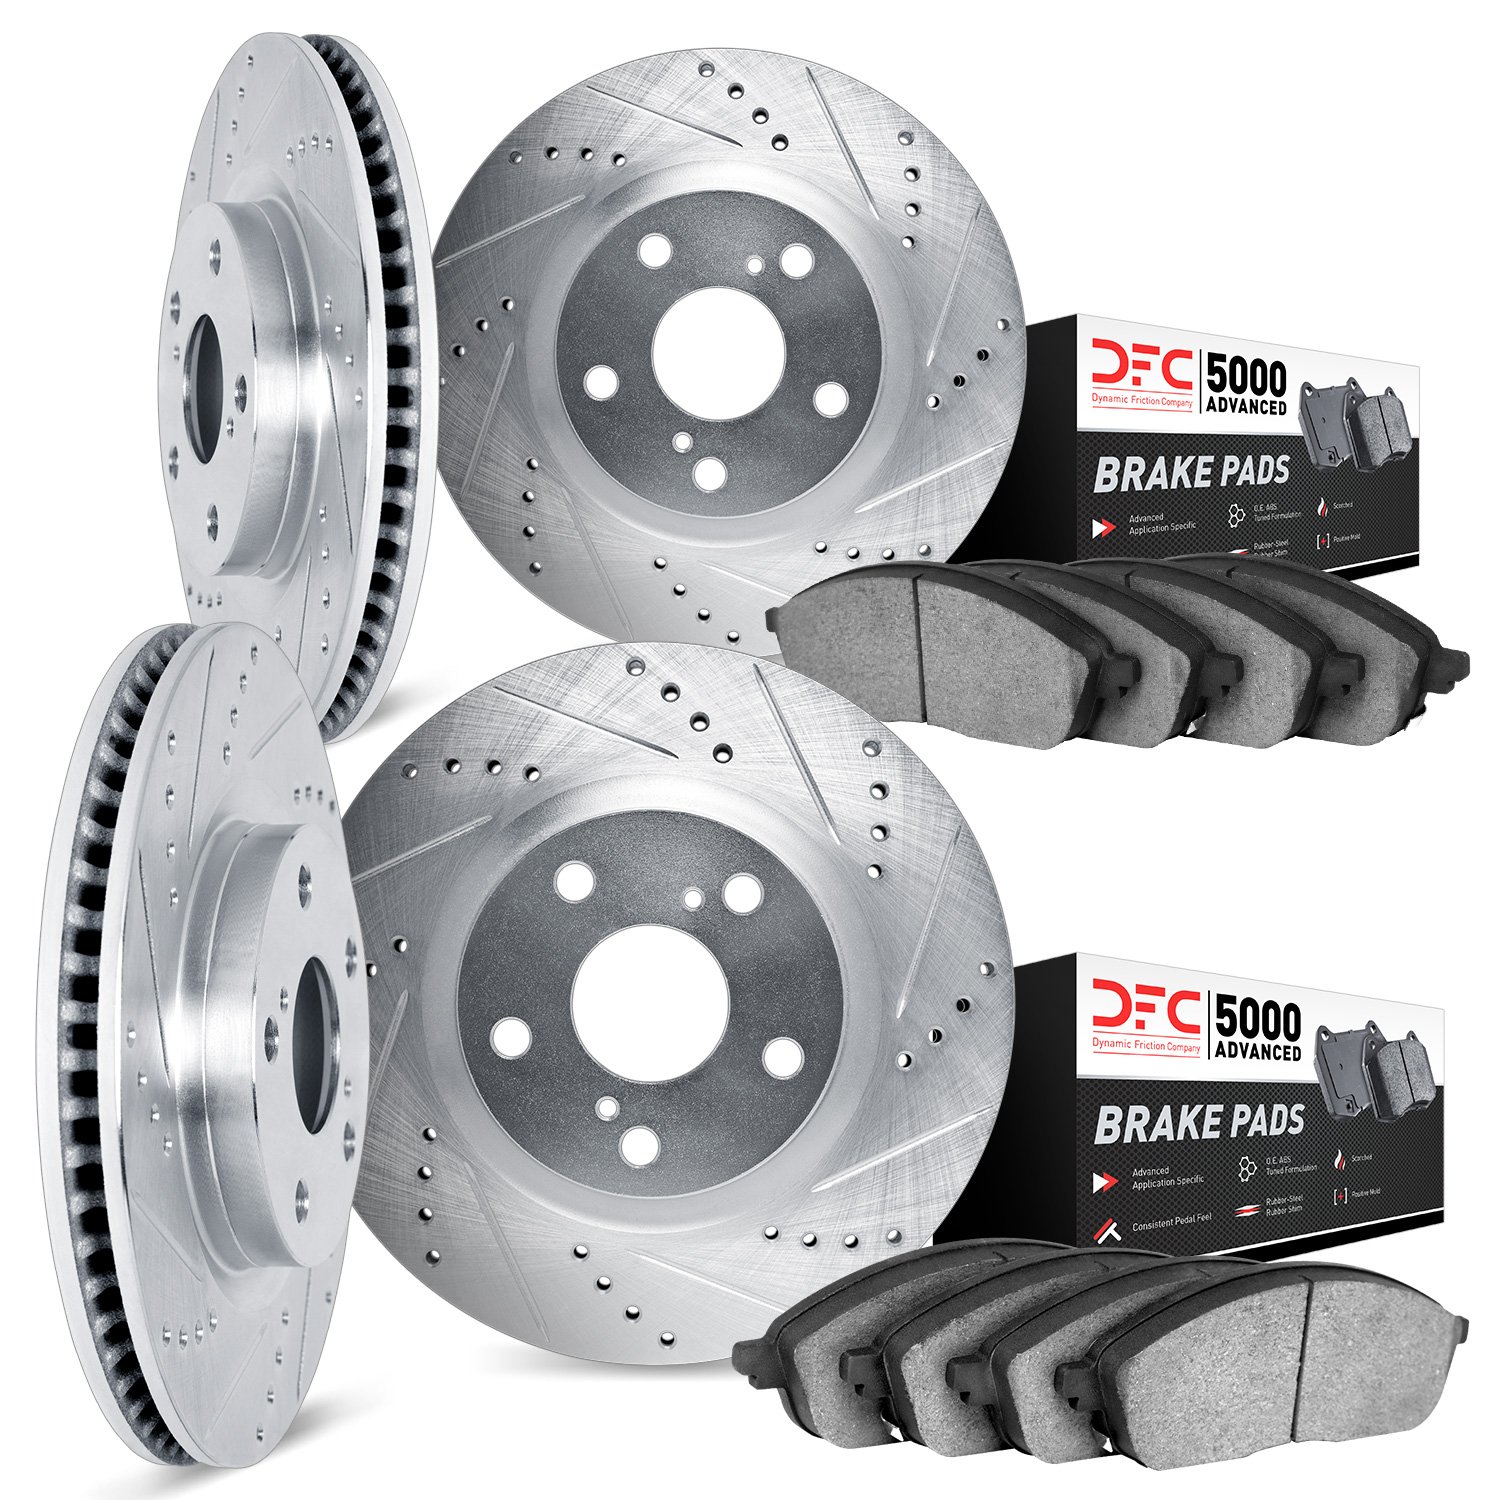 7504-54281 Drilled/Slotted Brake Rotors w/5000 Advanced Brake Pads Kit [Silver], 2007-2014 Ford/Lincoln/Mercury/Mazda, Position: